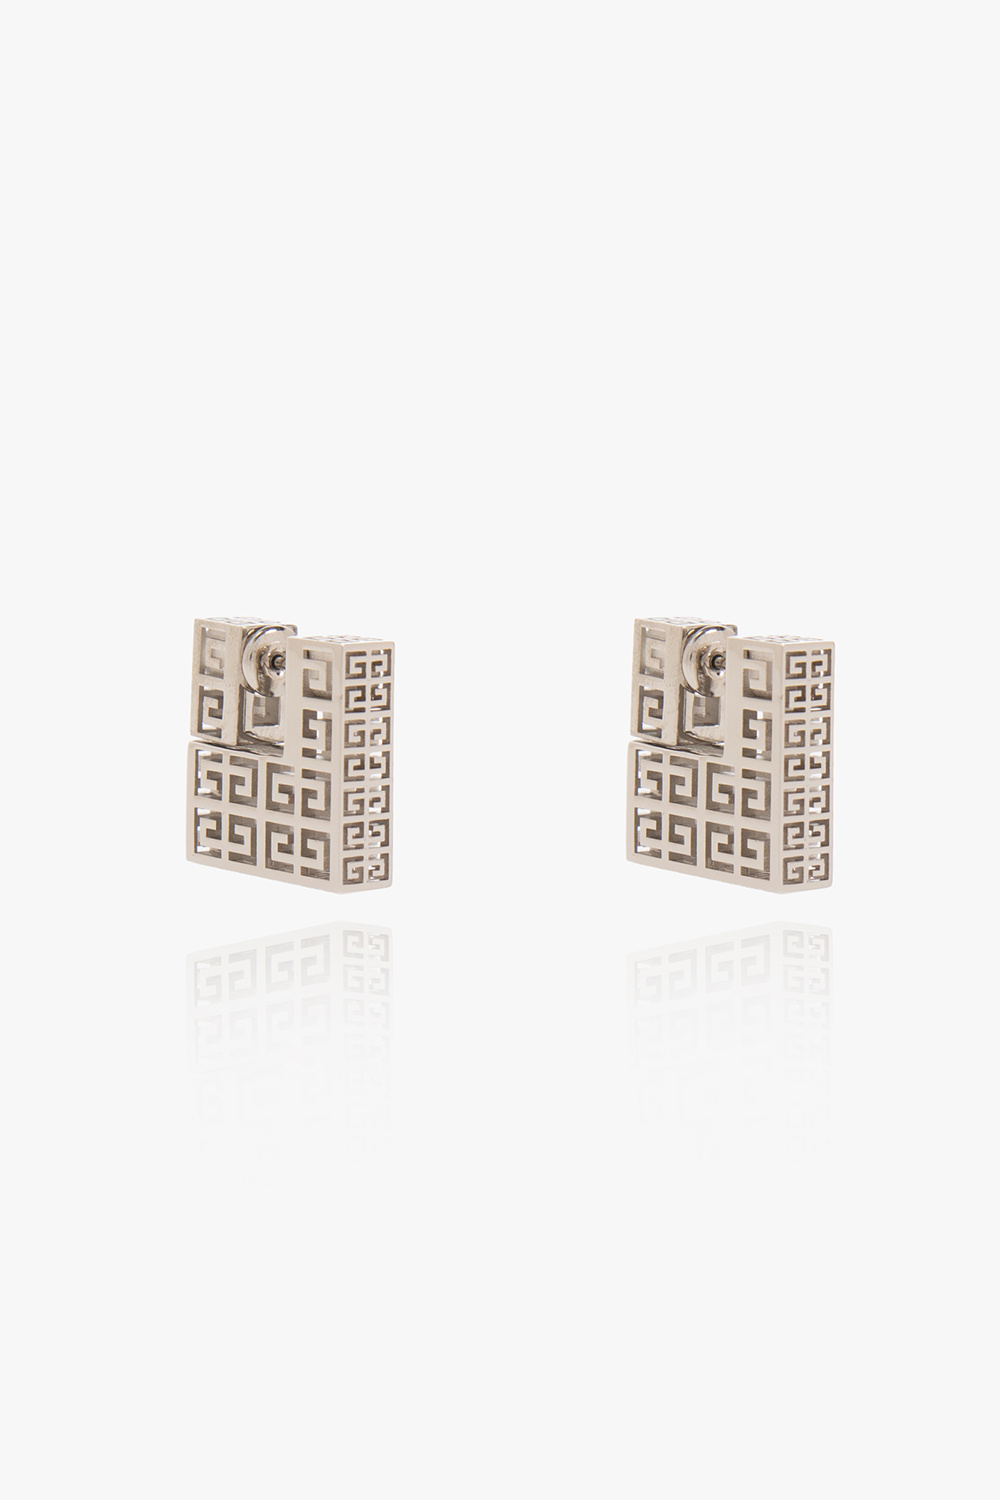 givenchy Logo ‘G Square’ earrings